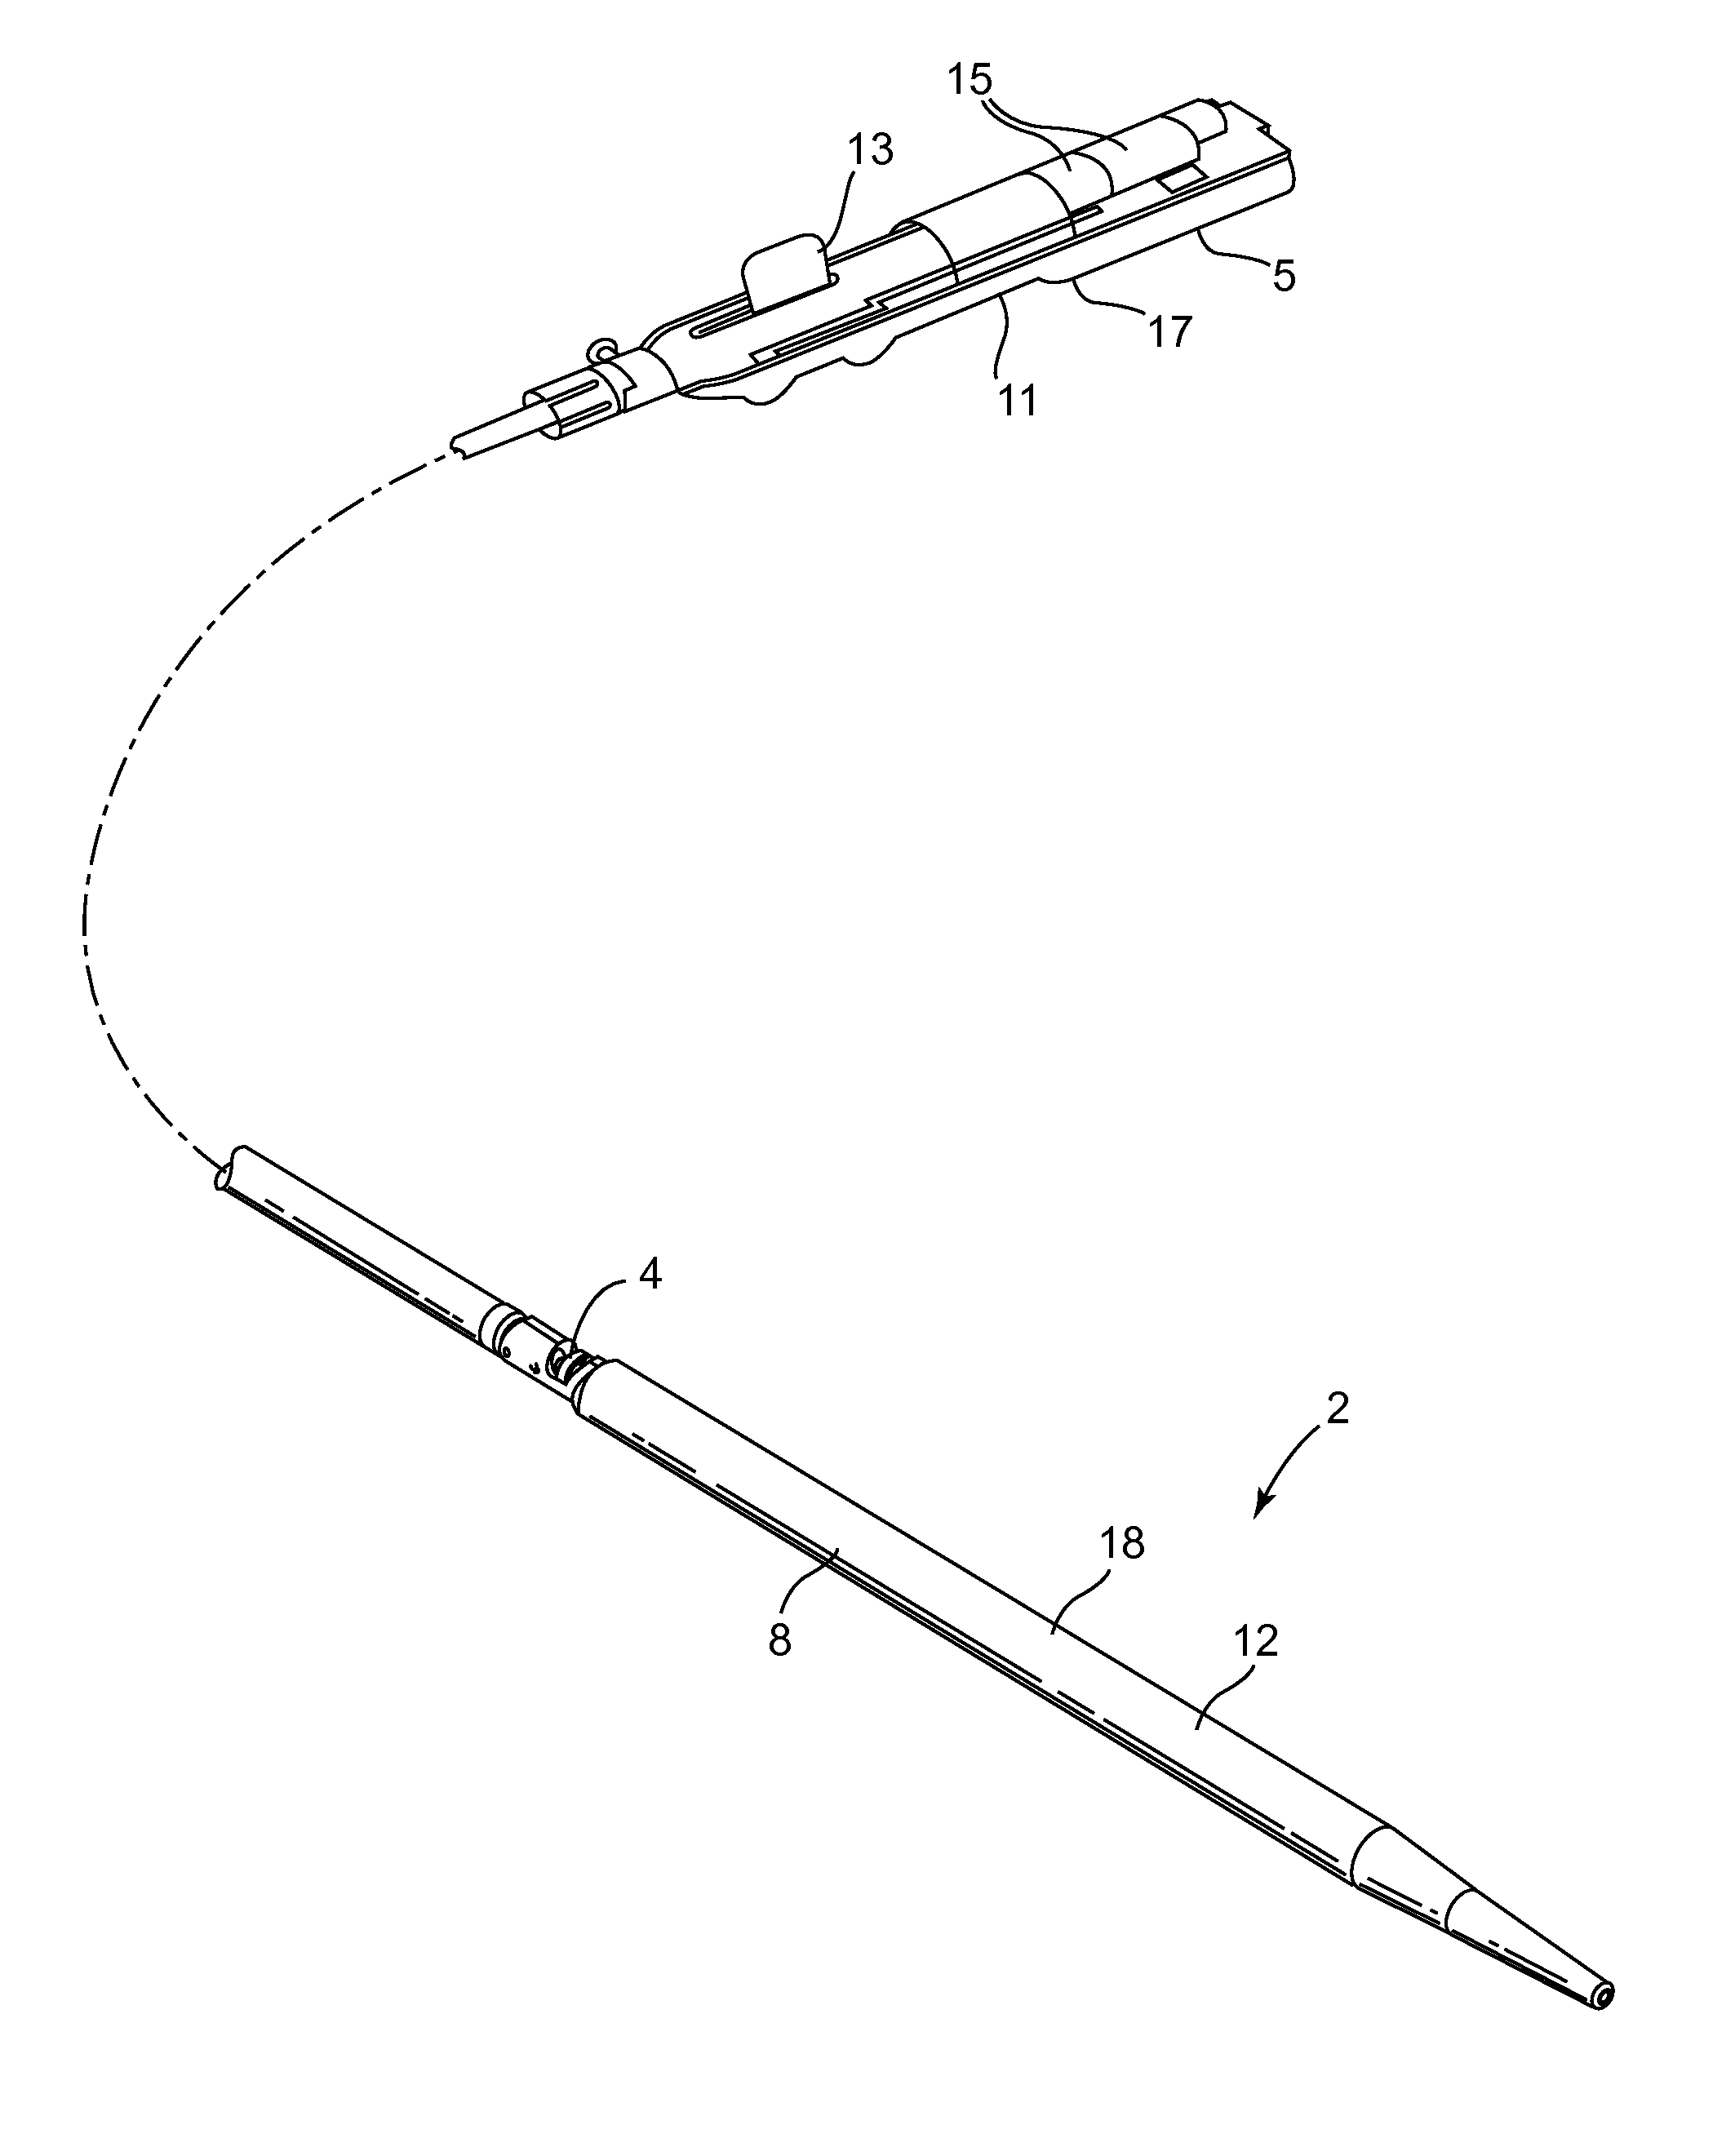 Methods and devices for cutting and abrading tissue